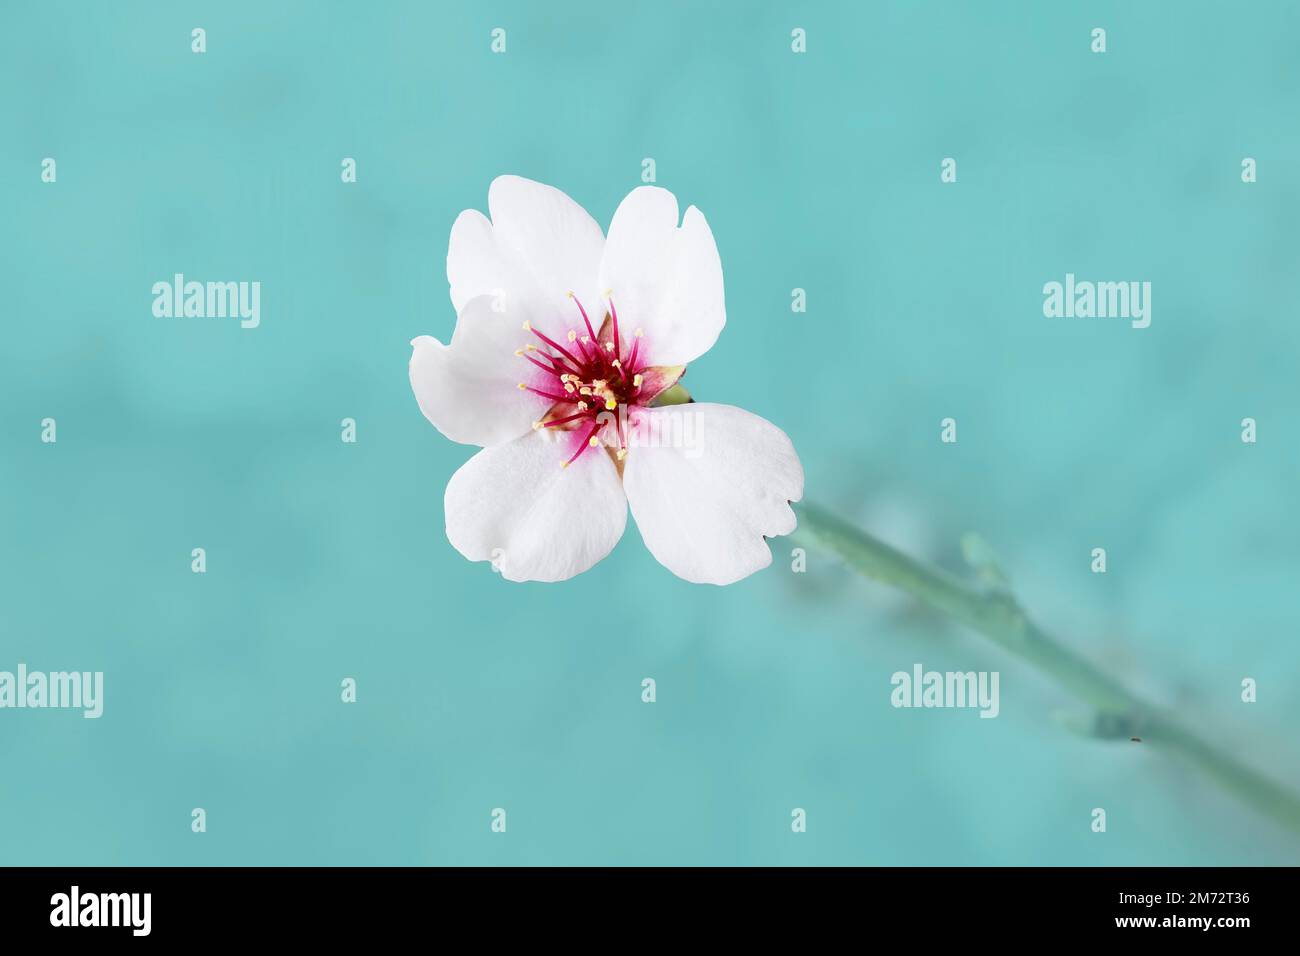 epic and pretty isolated almond blossom flower on blue, light blue, pastel background Stock Photo